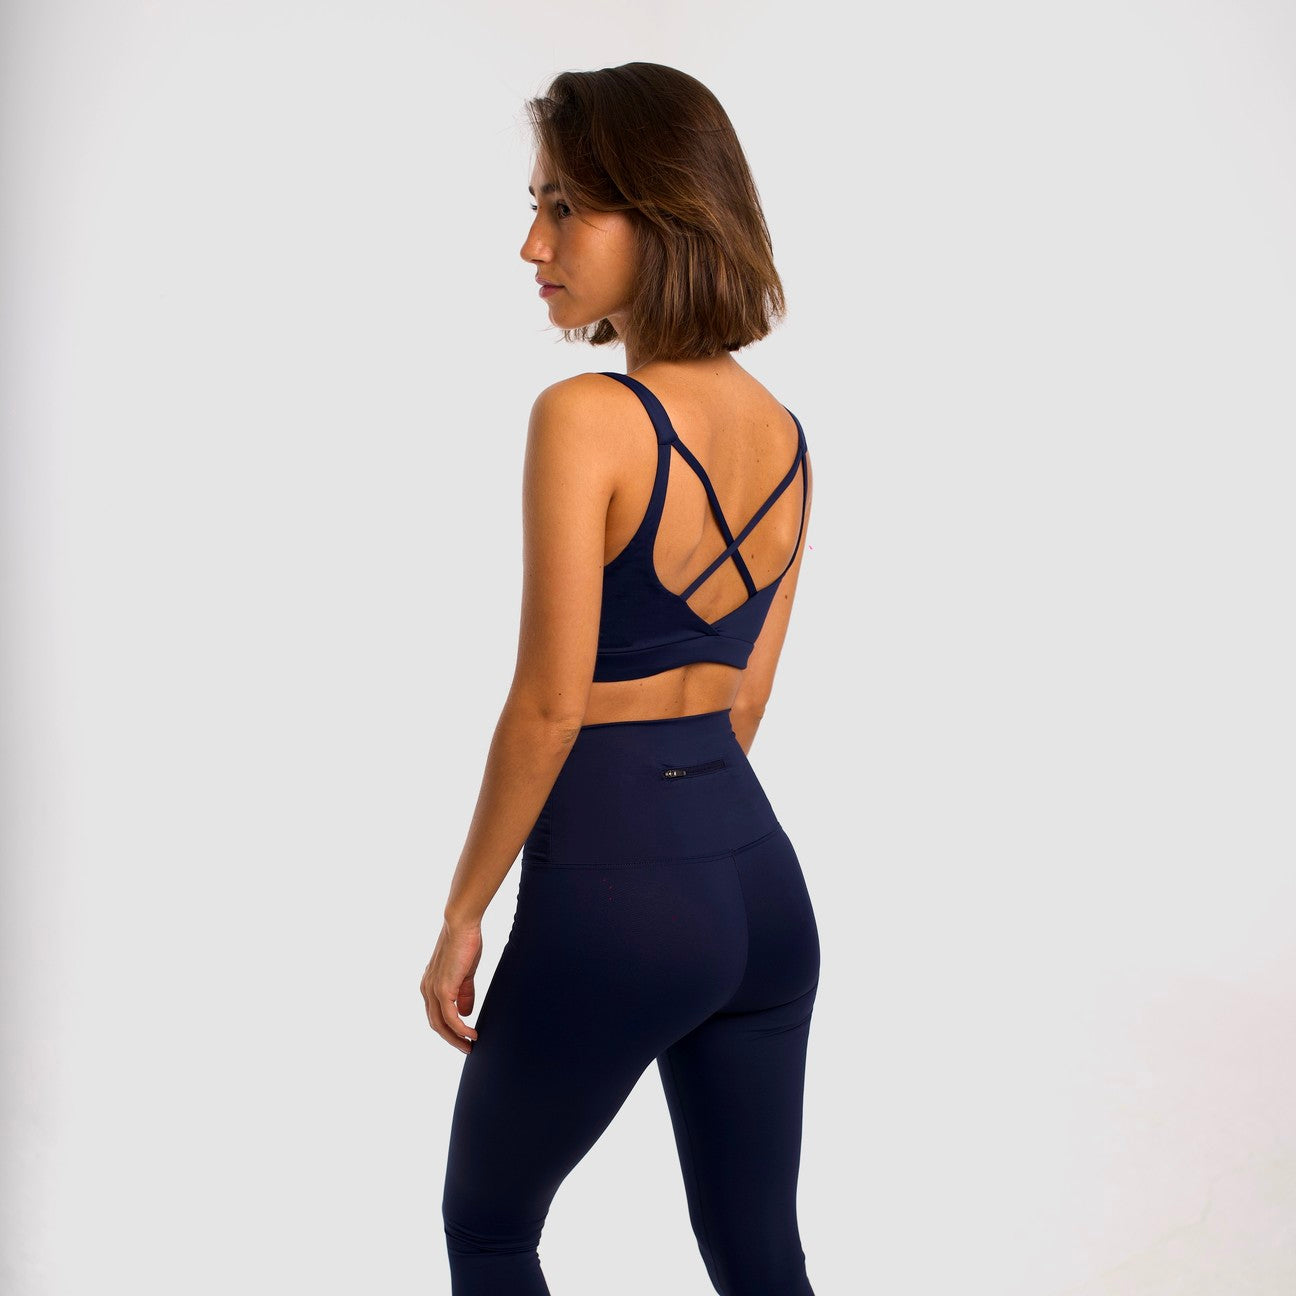 URBANIC Women Navy Blue Gym Leggings Price in India, Full Specifications &  Offers | DTashion.com